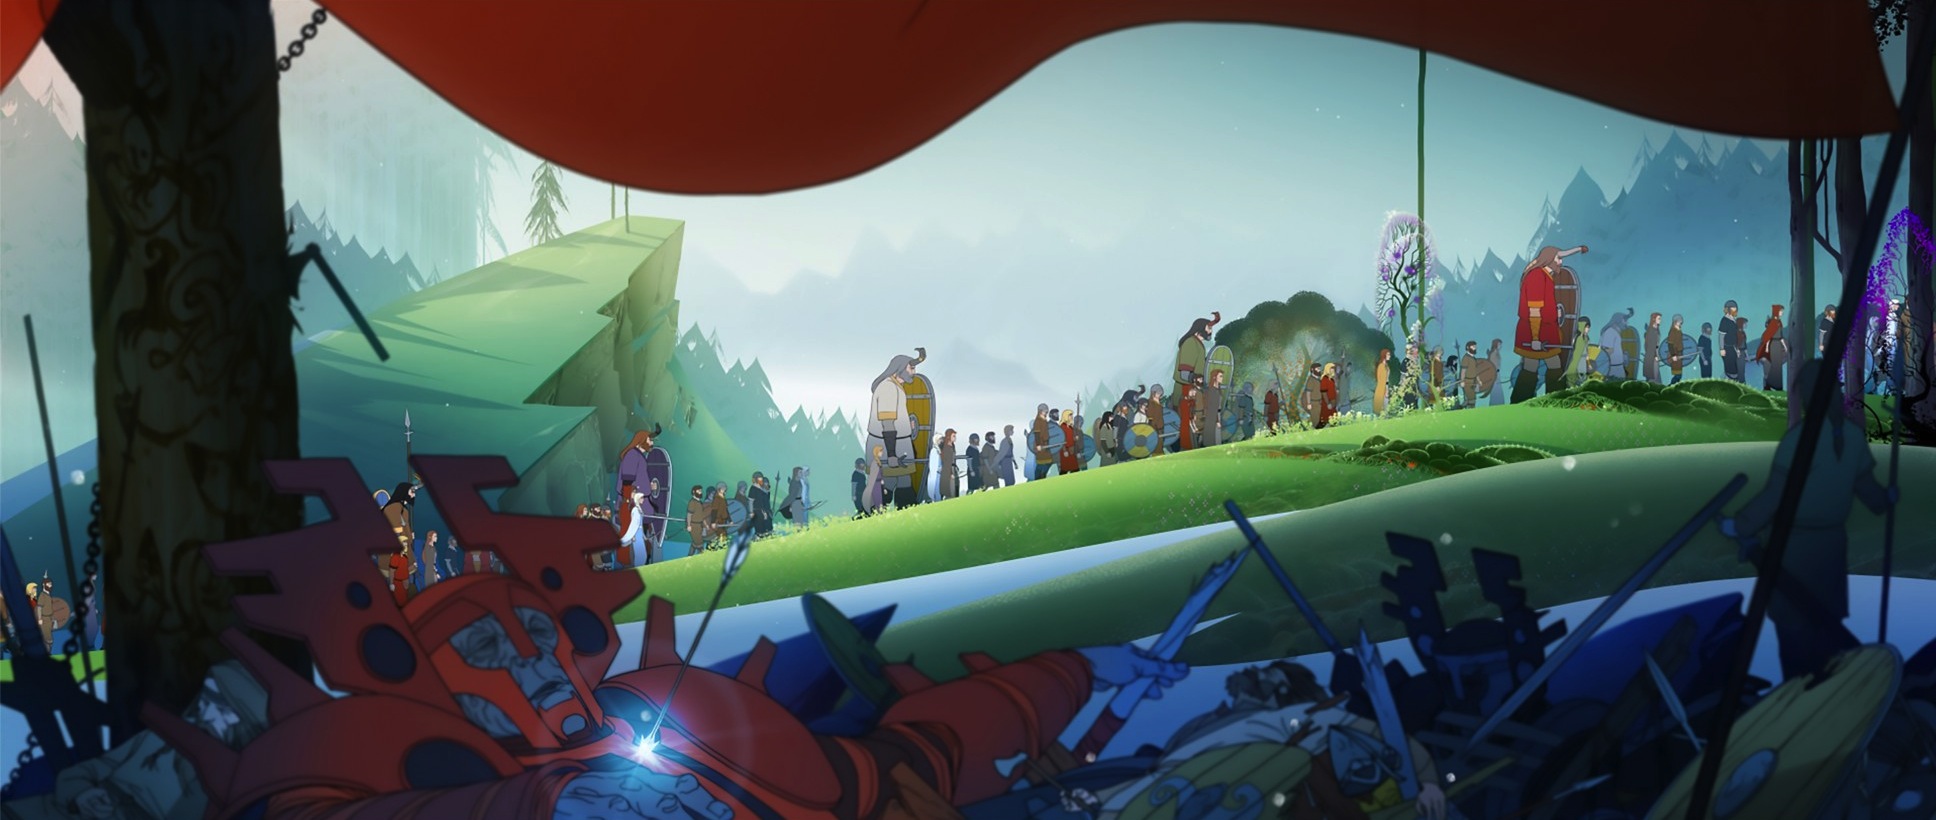 [UPDATE] The Banner Saga 2 Delayed to 2016, Console Ports for Original Still on Track